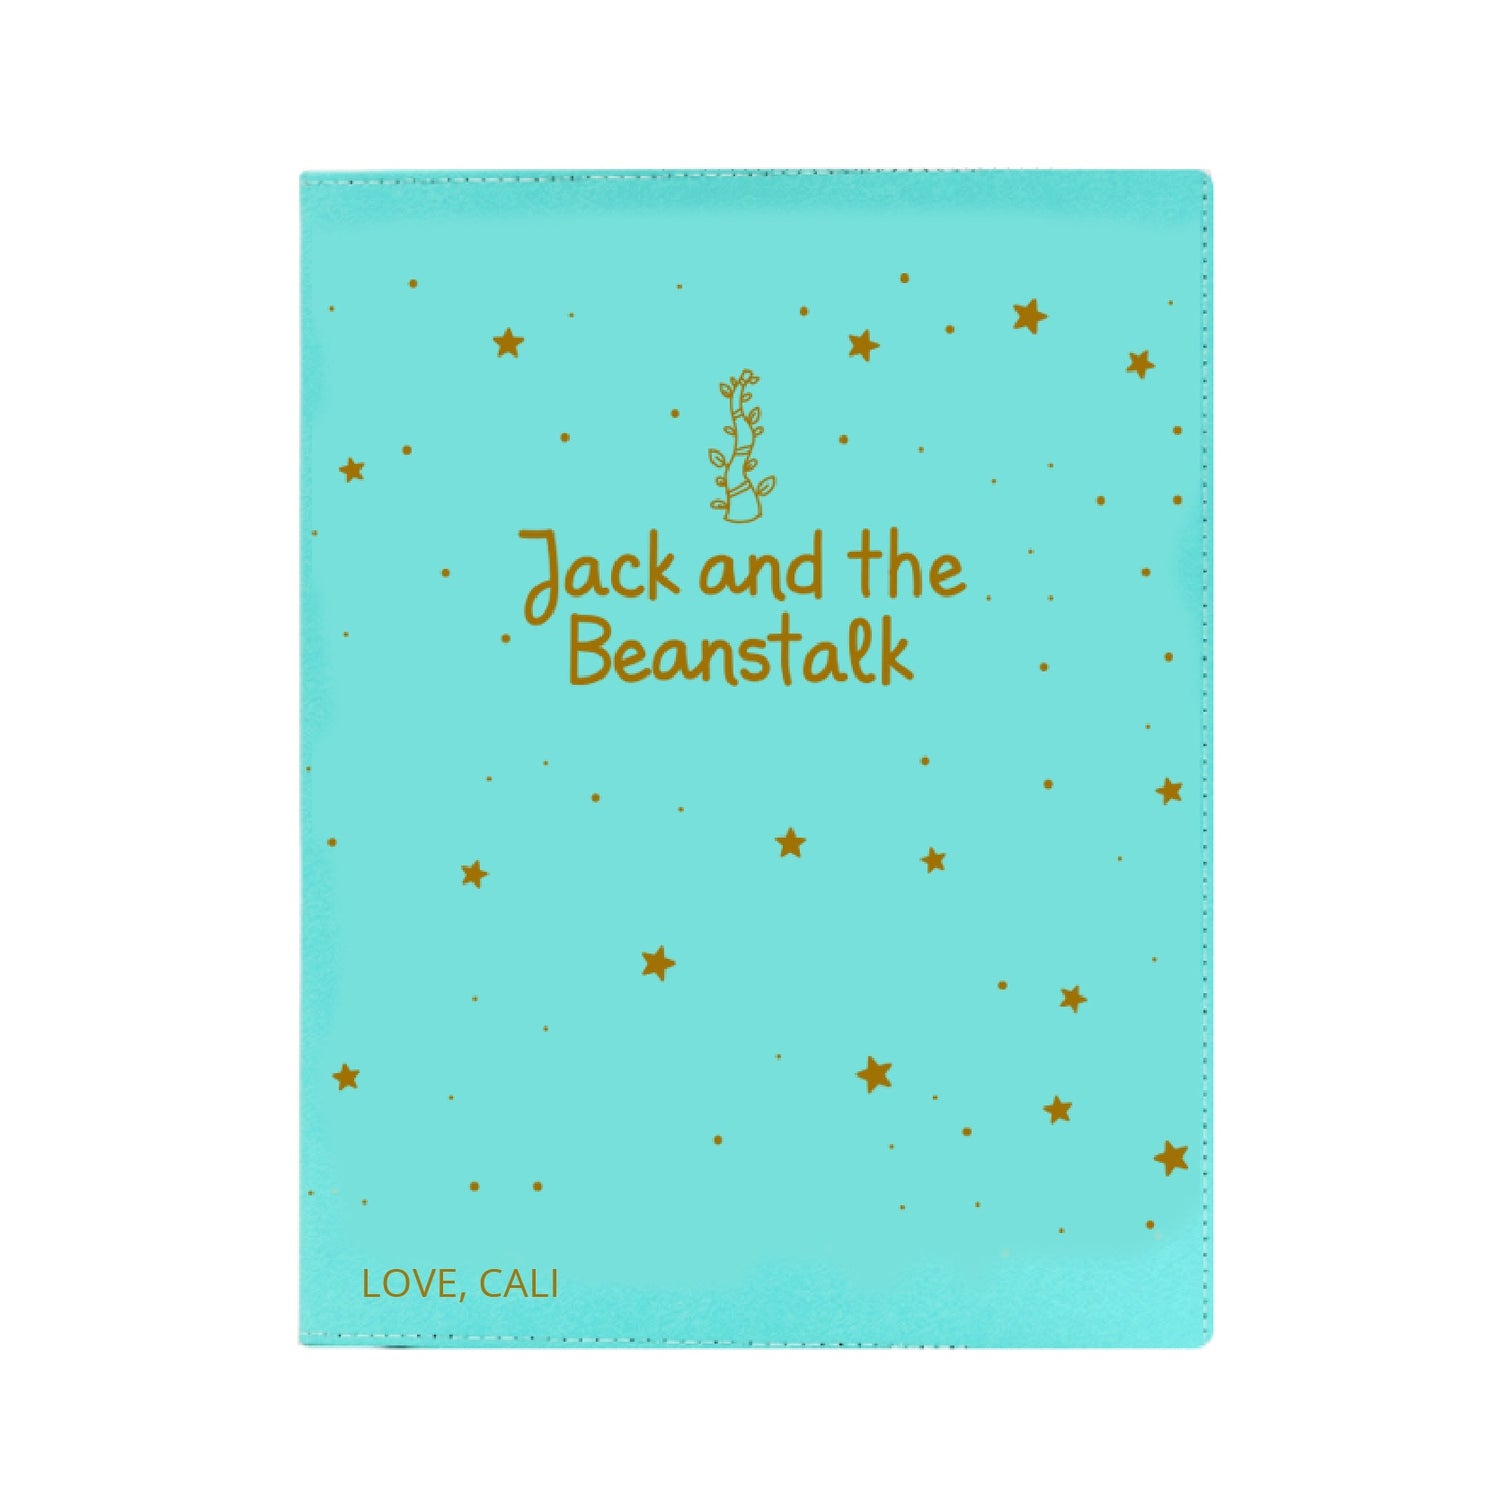 Engraved "Jack and the Beanstalk"